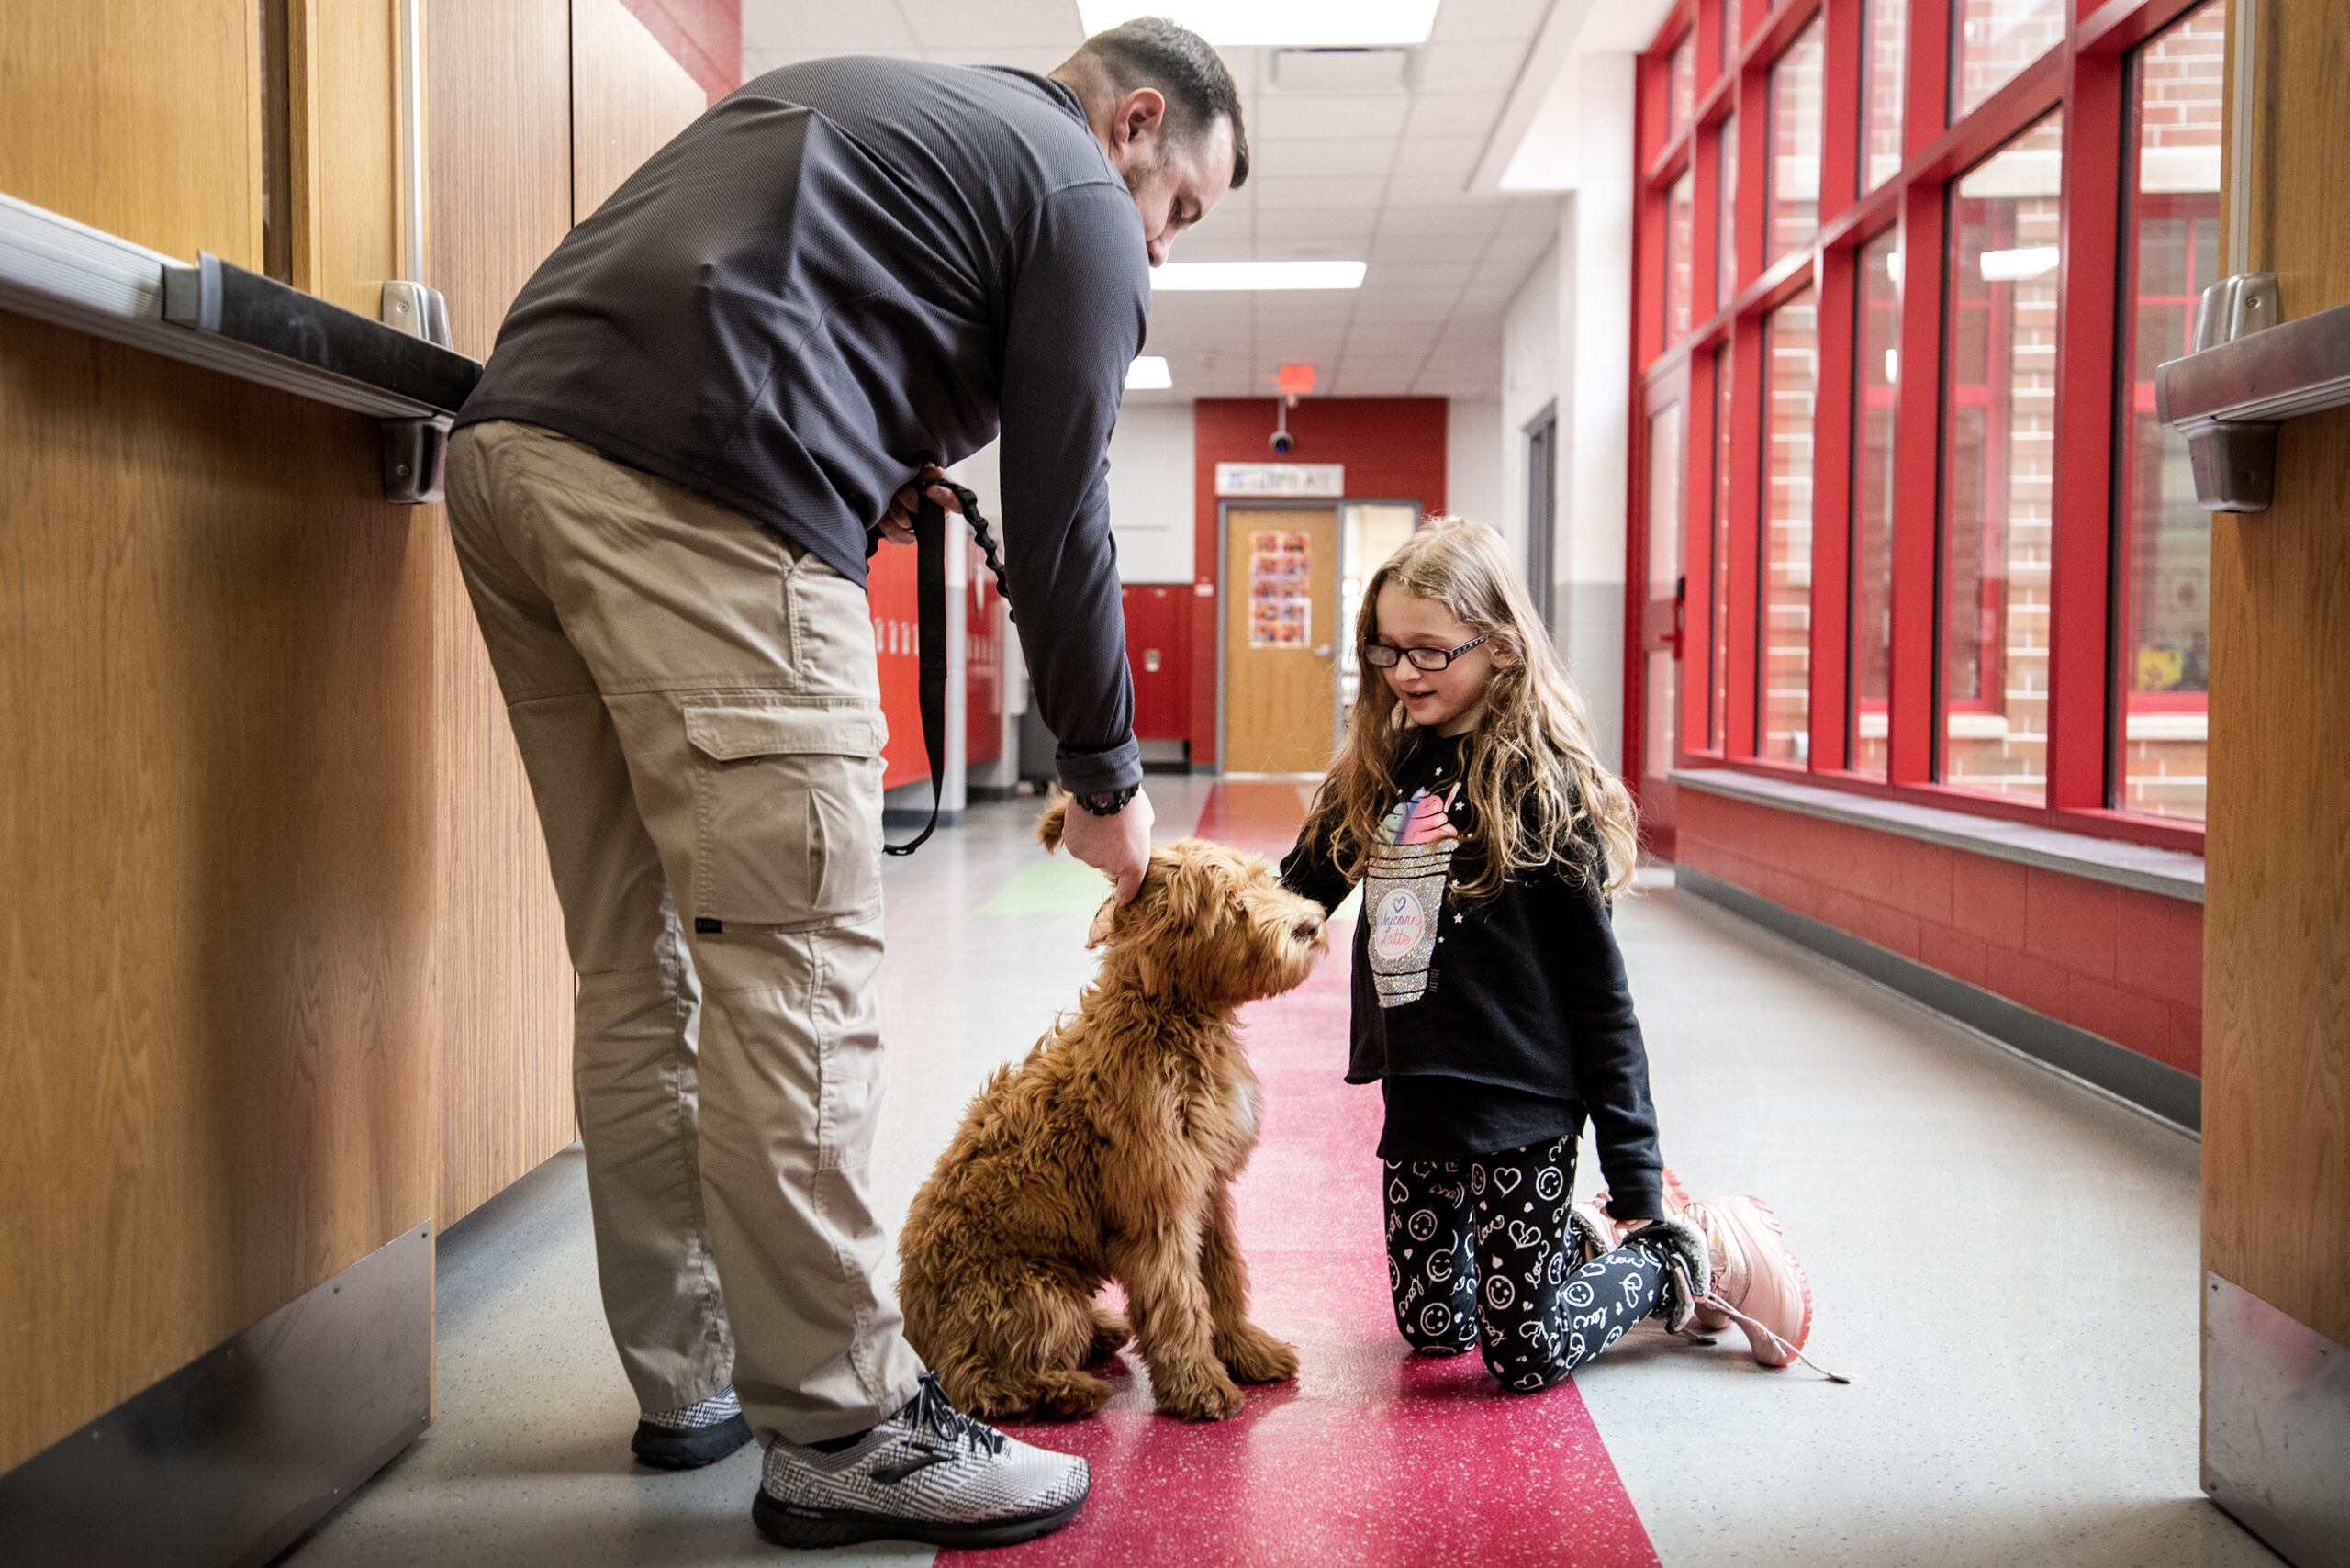 ‘They’re more willing to be open with the dog’: Wisconsin police departments turn to therapy dogs to respond to mental health needs